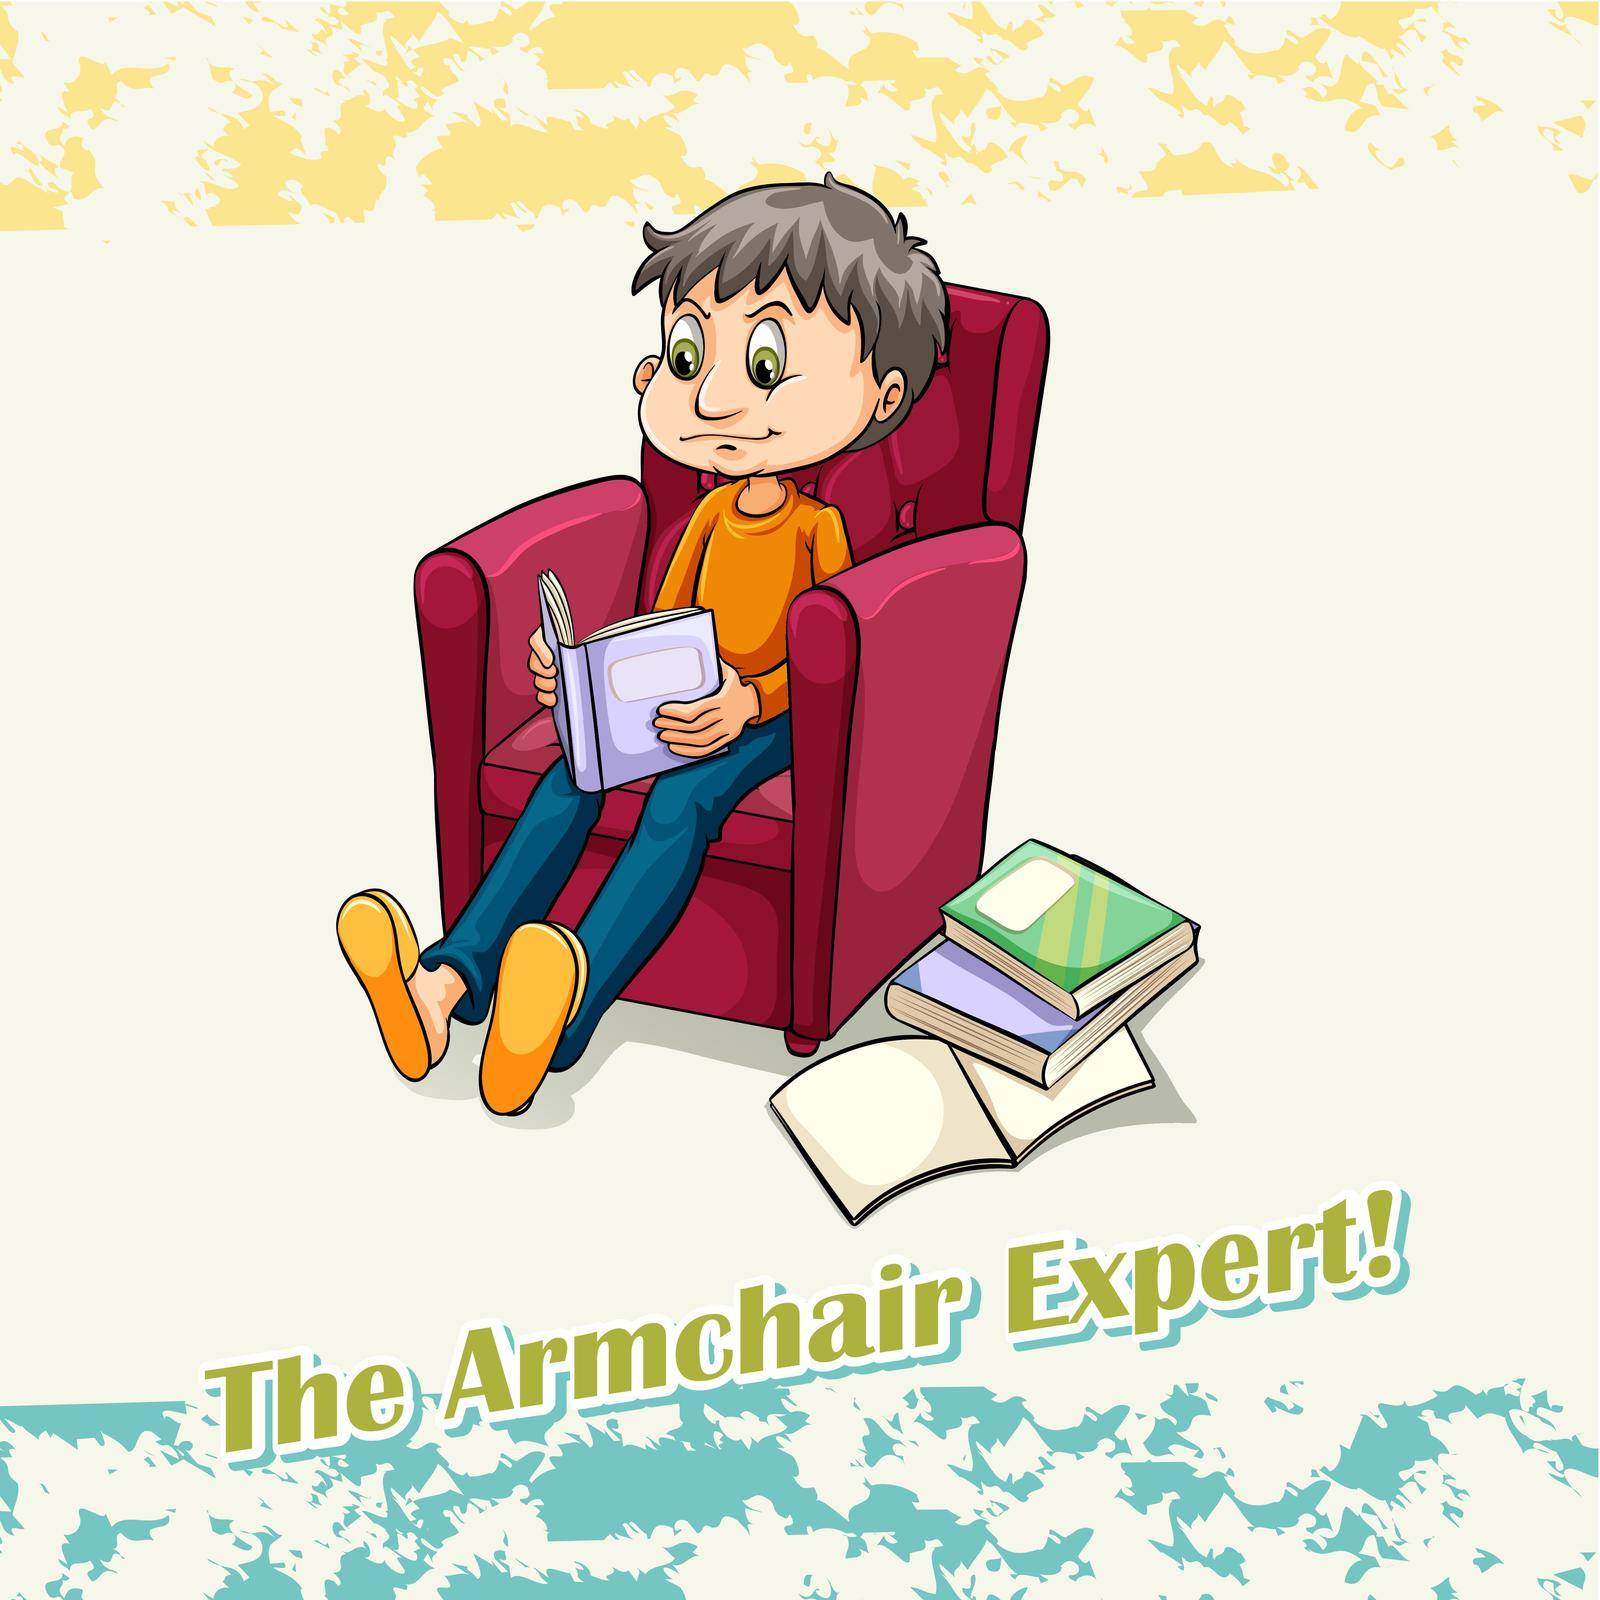 Old saying armchair expert illustration